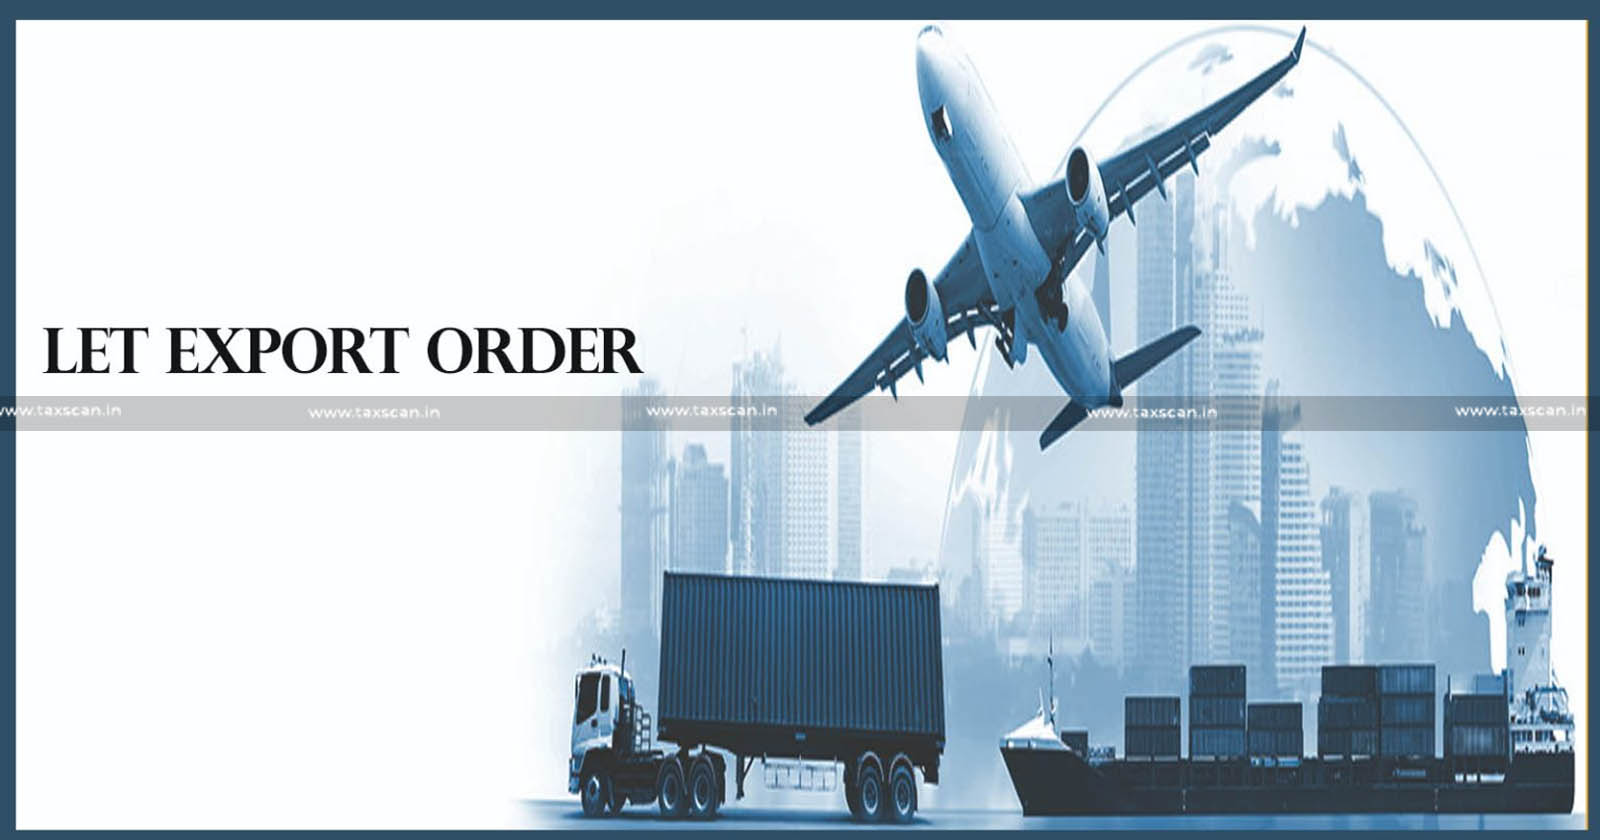 CBIC issues Circular - Expansion of automatic Let Export Order - ECCS -LEO - Let Export Order -CBIC issues Circular on Expansion of automatic Let Export Order - taxscan